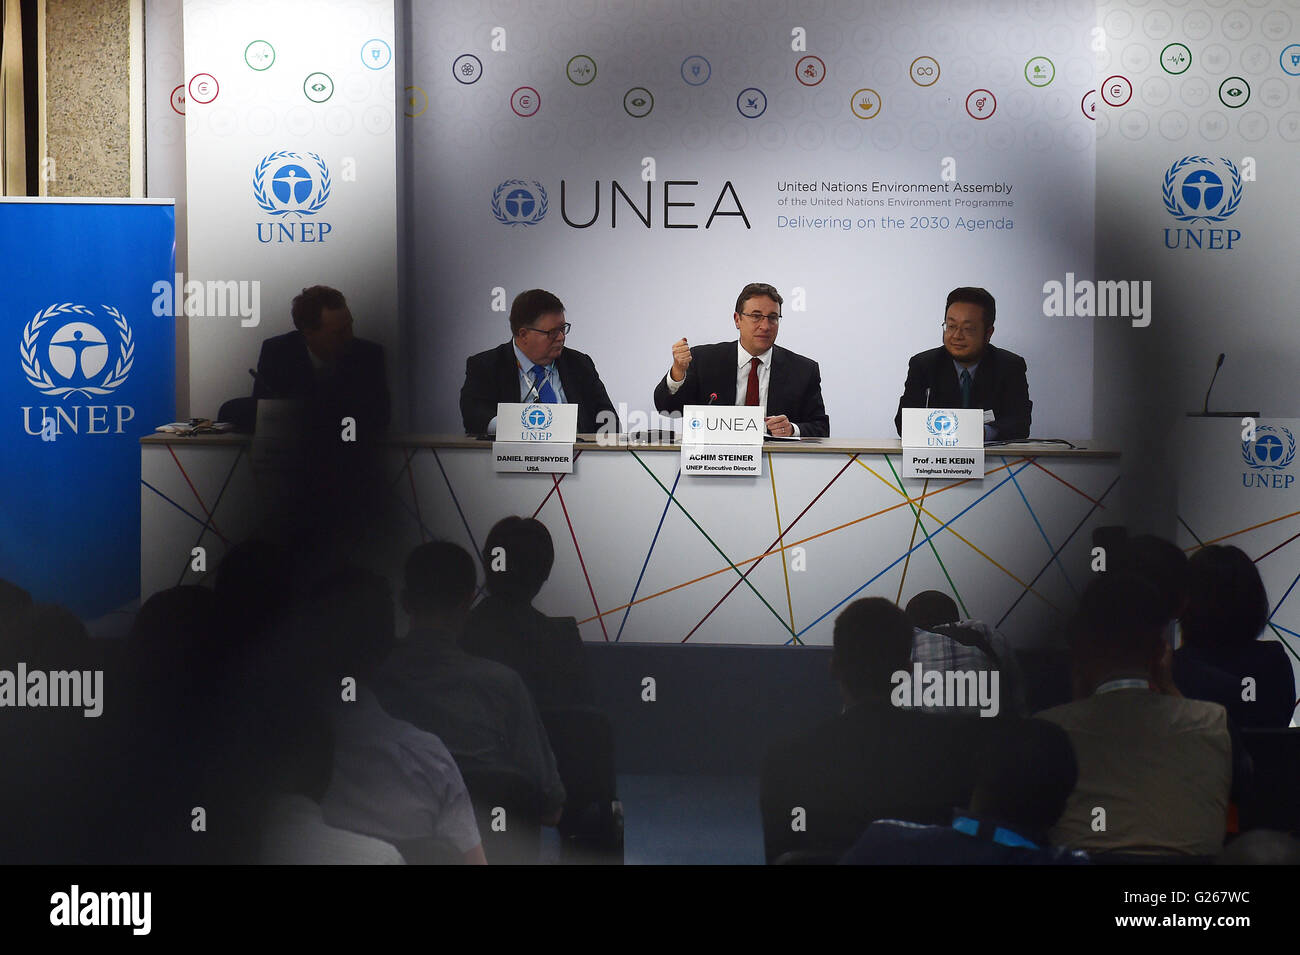 (160524)-- NAIROBI, May 24, 2016 (Xinhua)-- UNEP Executive Director Achim Steiner (2nd R) speaks during a press conference of the ongoing second edition of the United Nations Environment Assembly in Nairobi, Kenya, May 24, 2016. The United Nations Environmental Program (UNEP) has said there is need for governments to refashion policy interventions aimed at reducing air pollution. (Xinhua/Sun Ruibo) Stock Photo